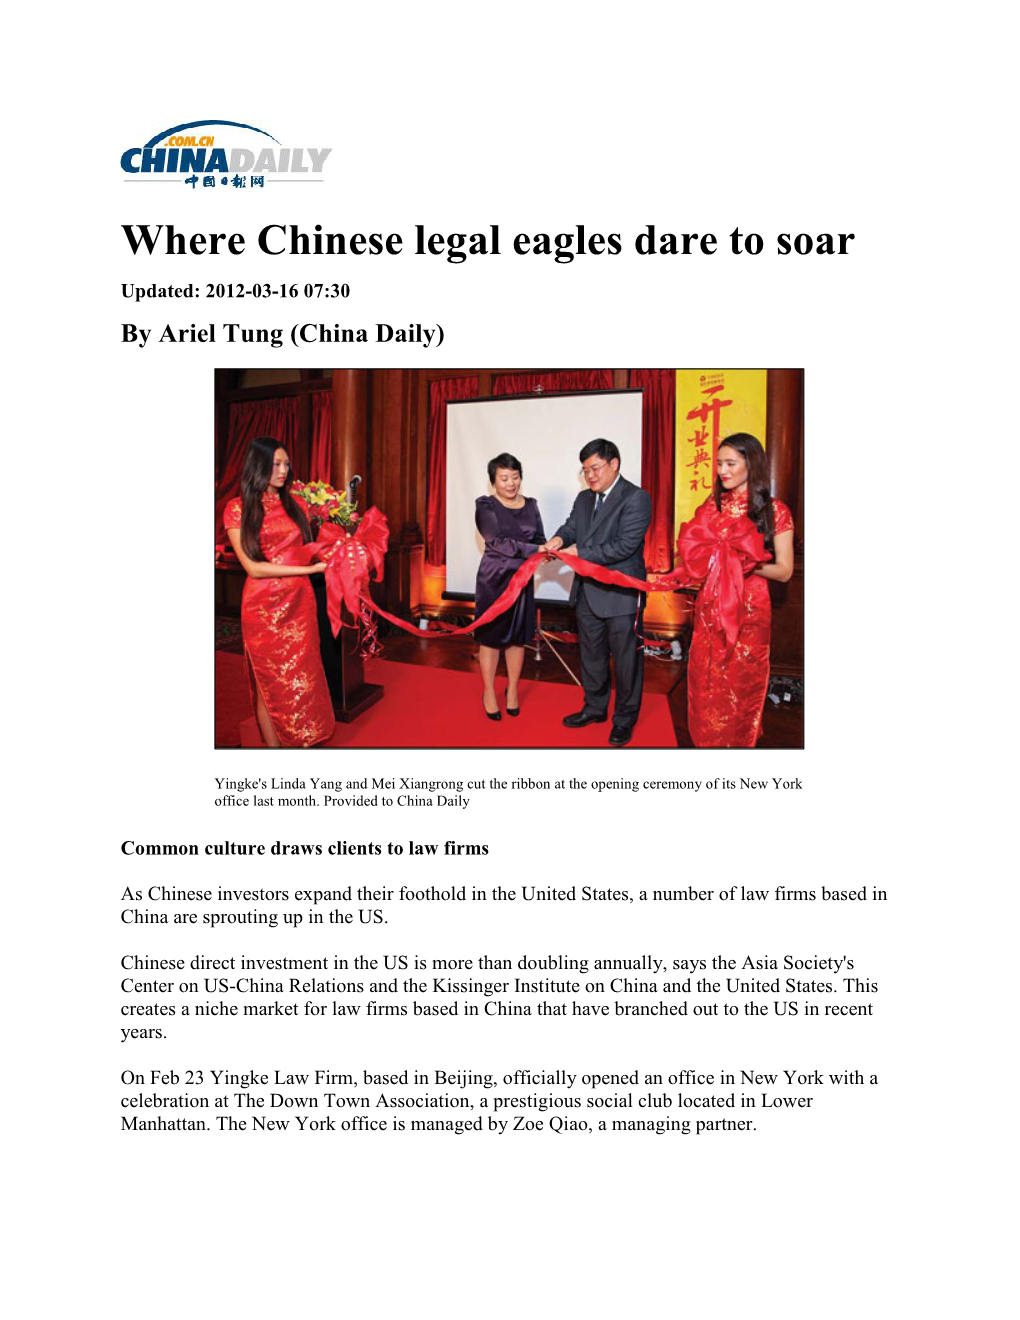 Where Chinese Legal Eagles Dare to Soar